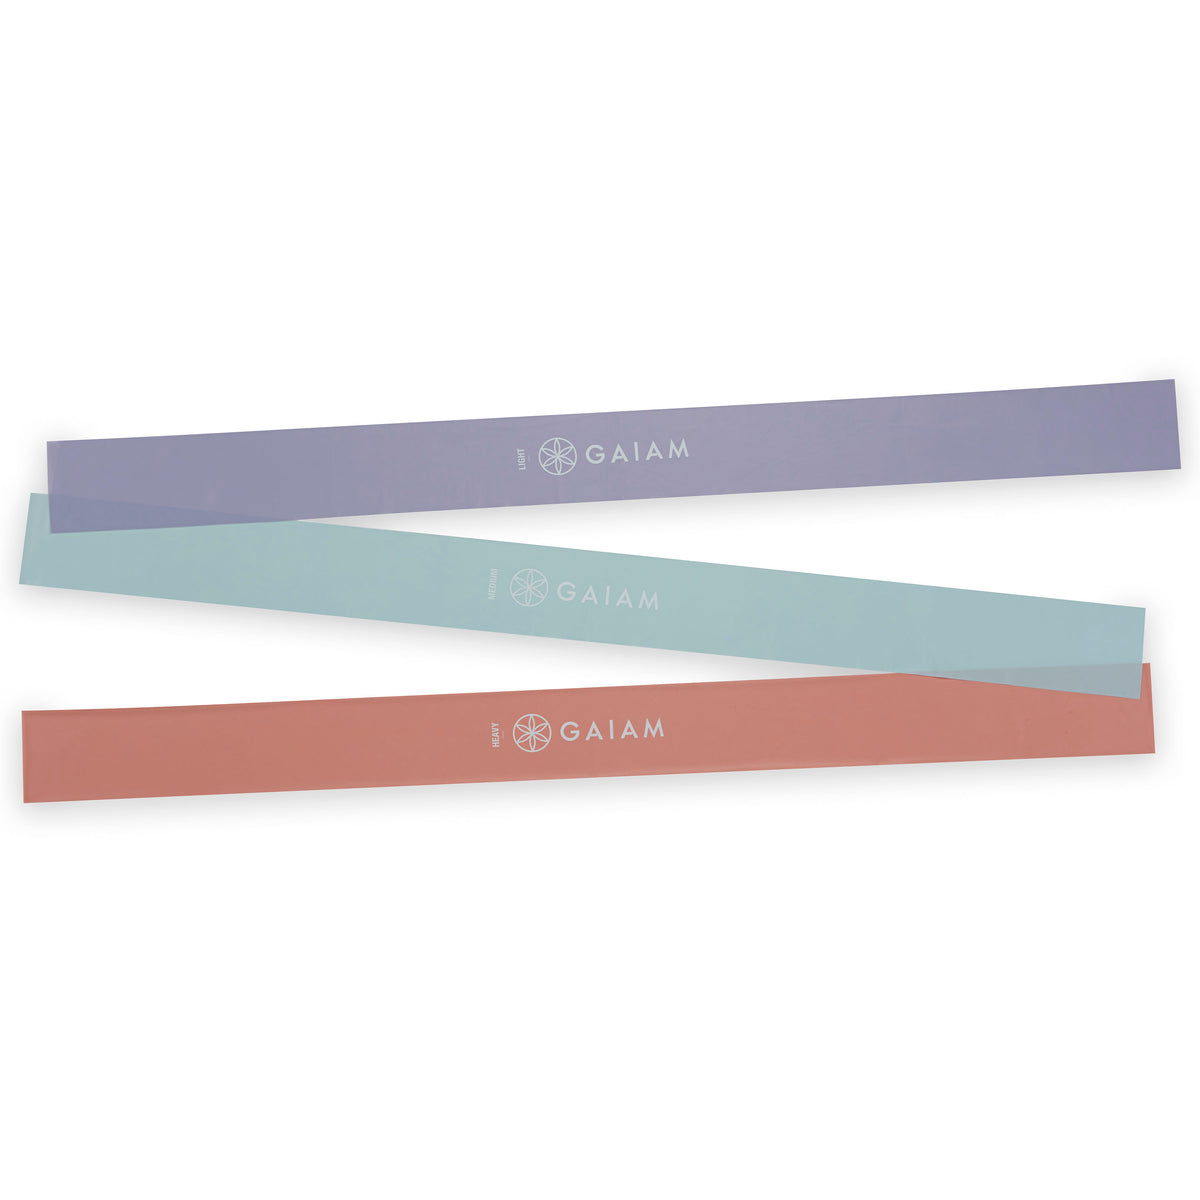 Gaiam Flat Bands (3-Pack) all three bands